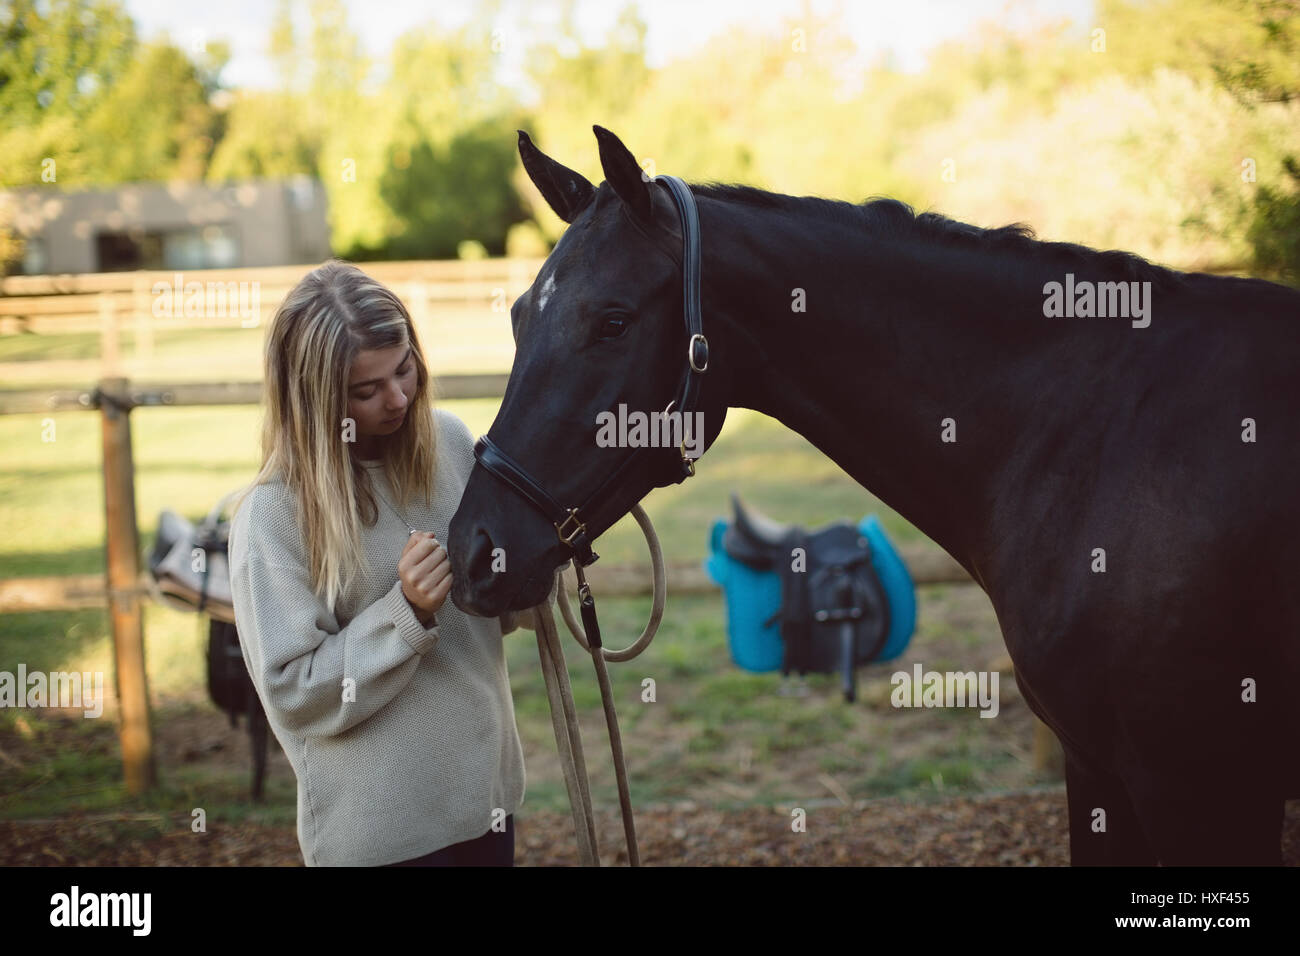 Woman petting horse in farm on a sunny day Stock Photo